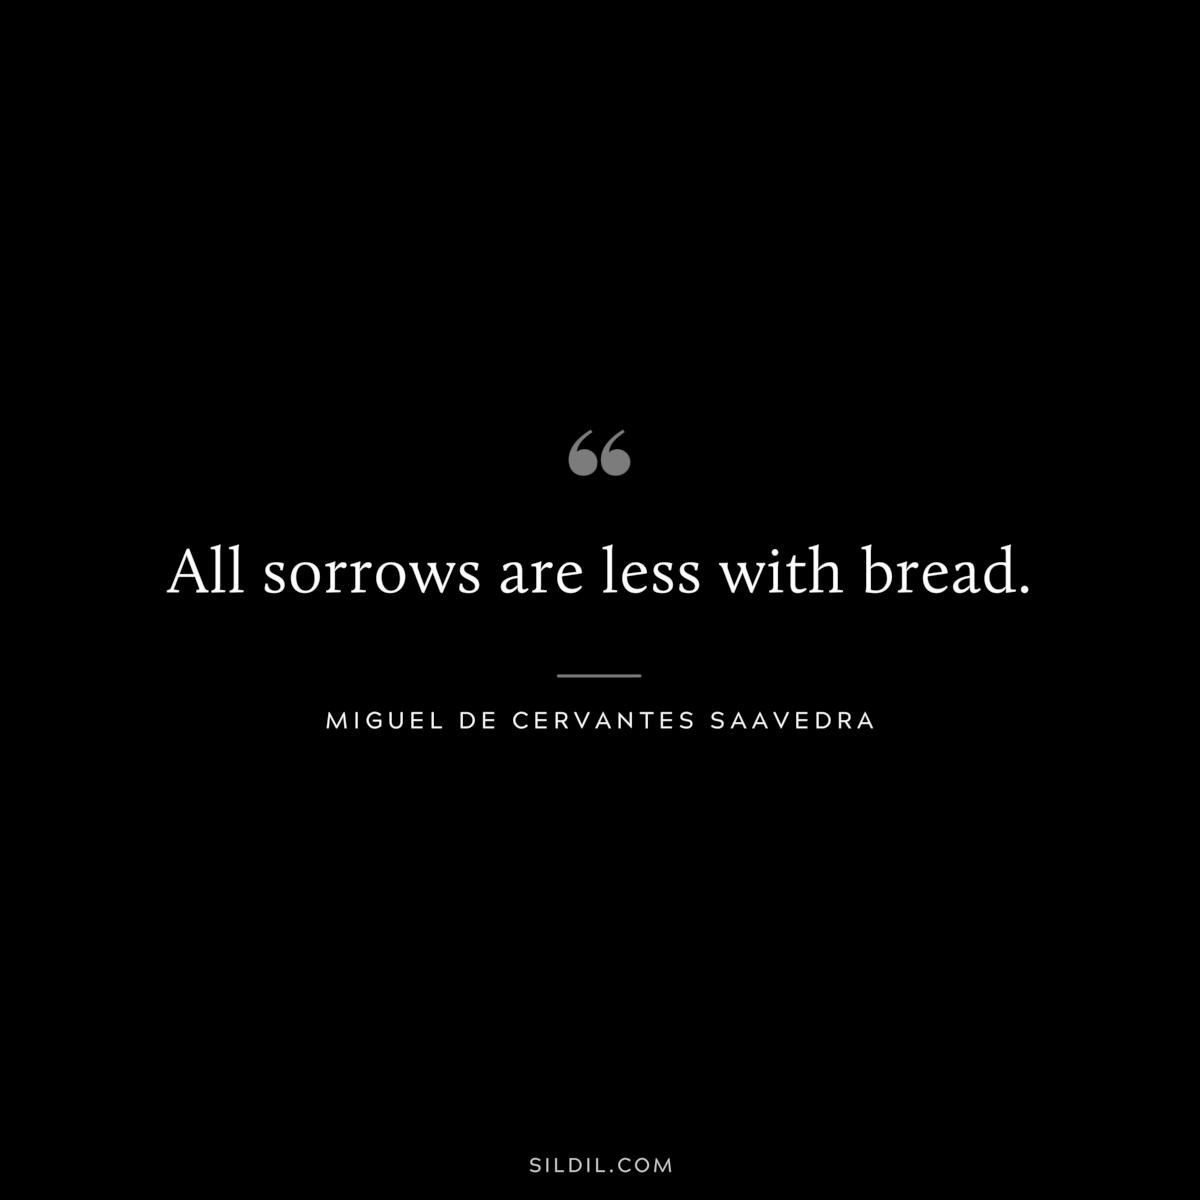 All sorrows are less with bread. ― Miguel de Cervantes Saavedra